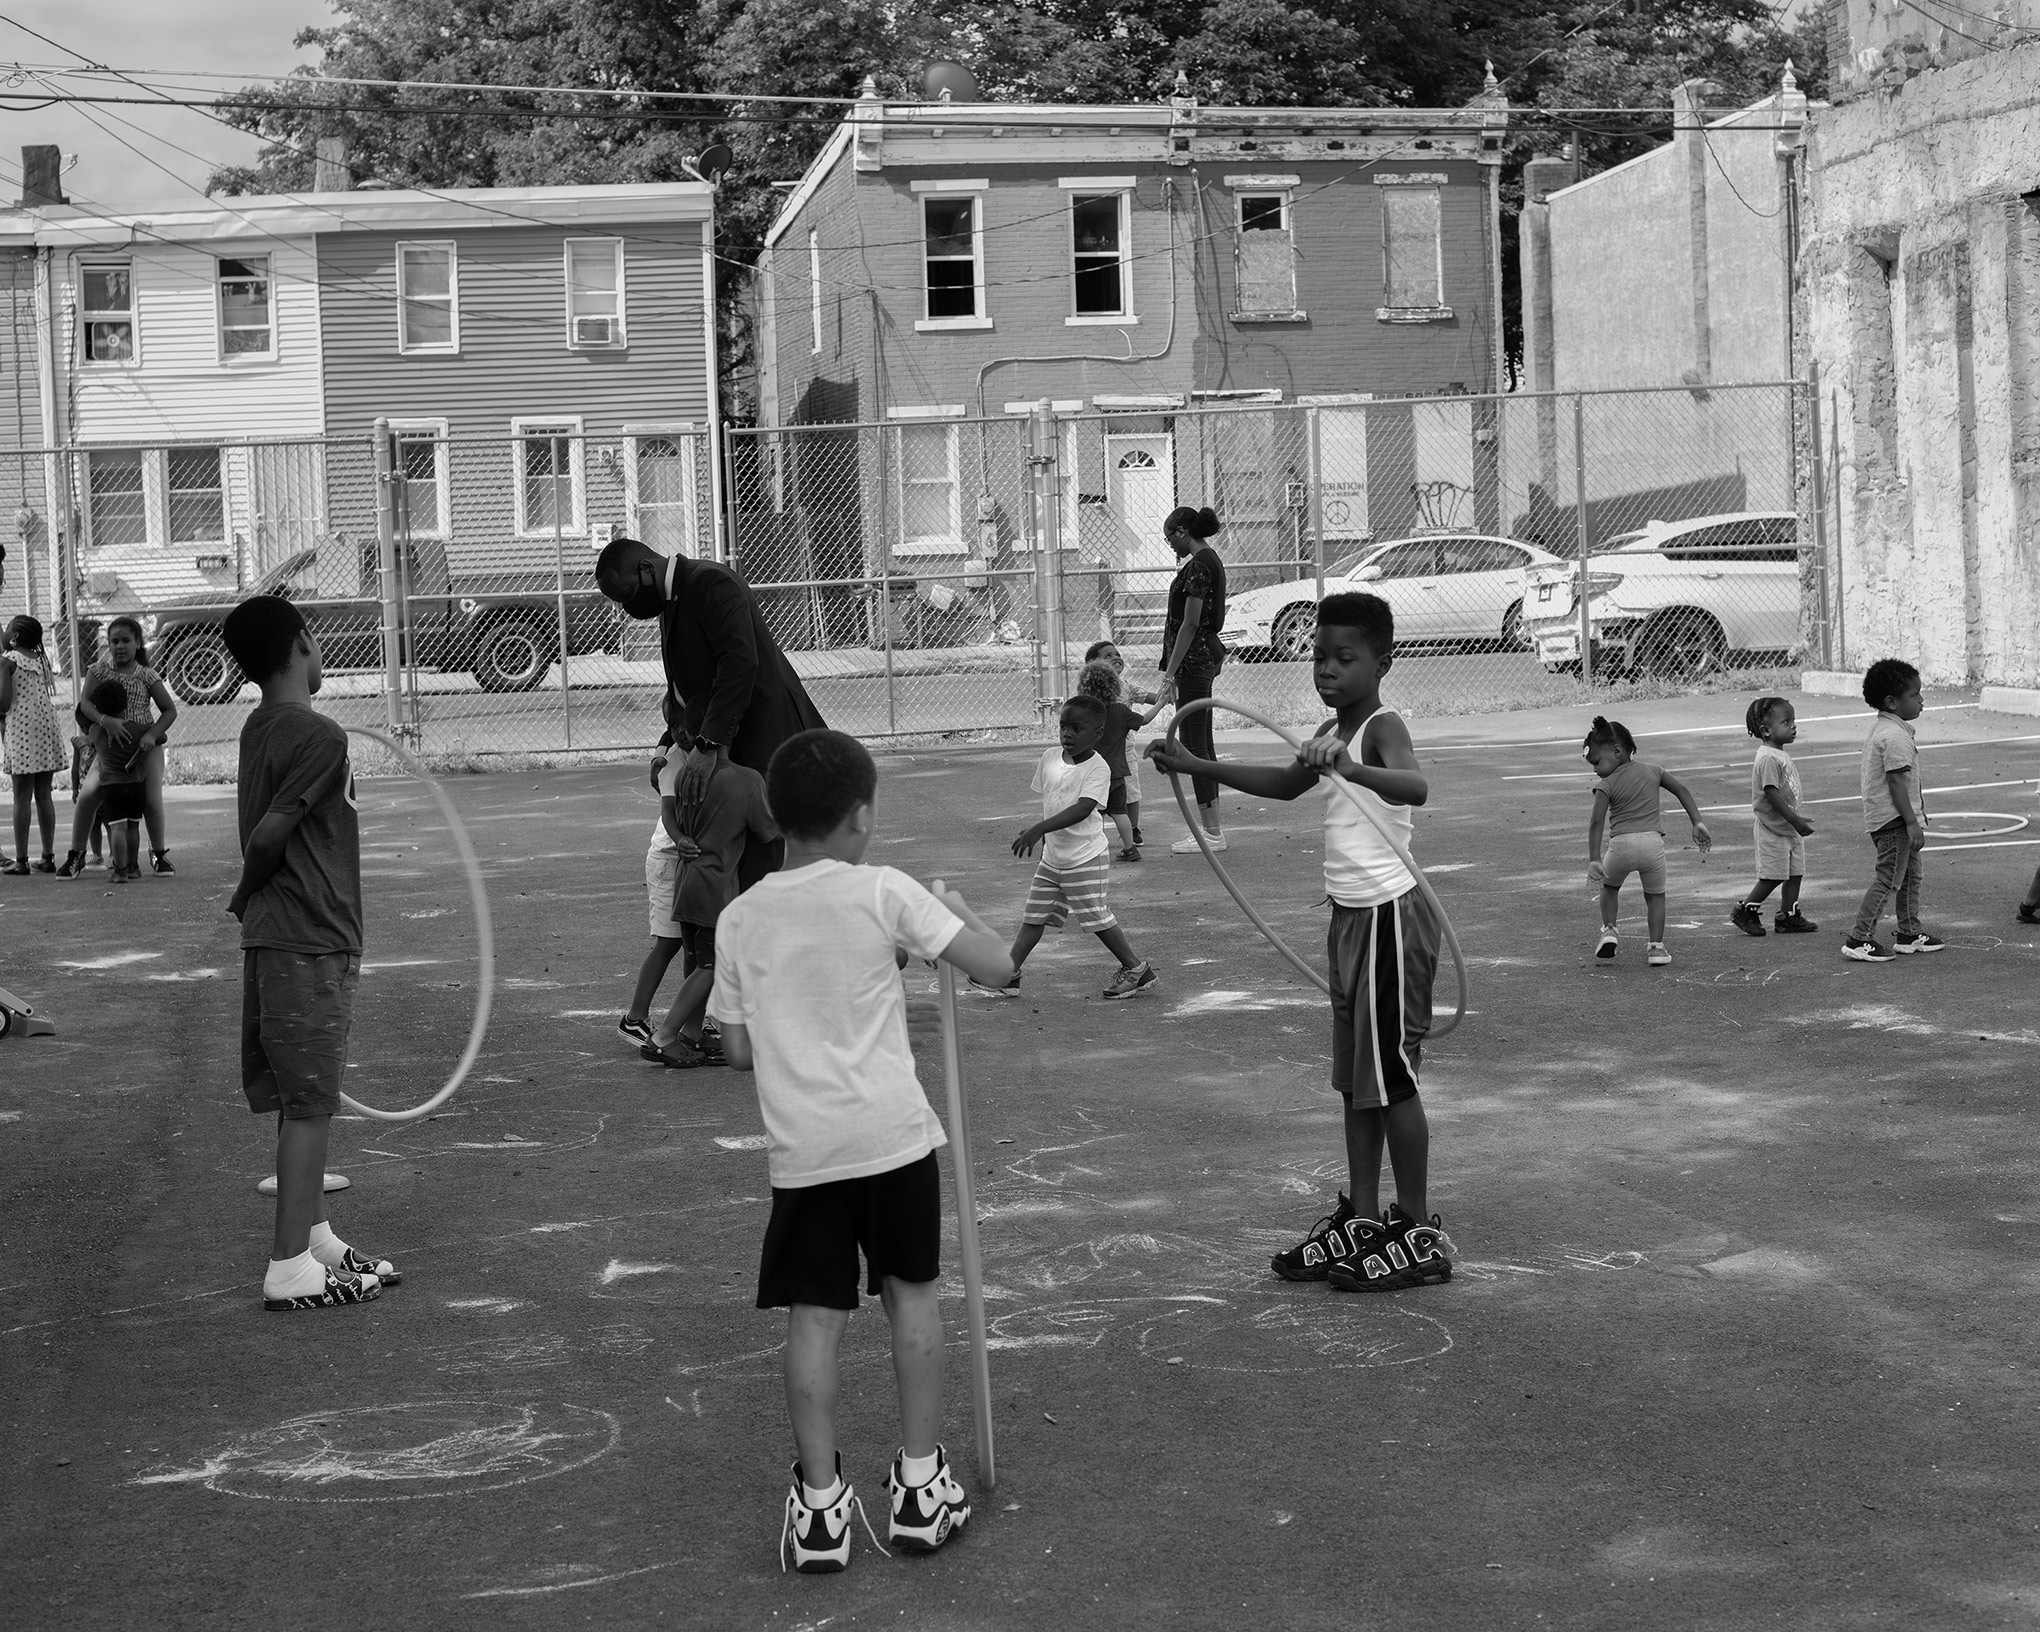 Minister Muhammad, who compares Camden’s old police department to a building so wrecked it was only worth tearing down, plays with children at Camden’s MEL Childcare Center, which is associated with his temple. (Widline Cadet for TIME)